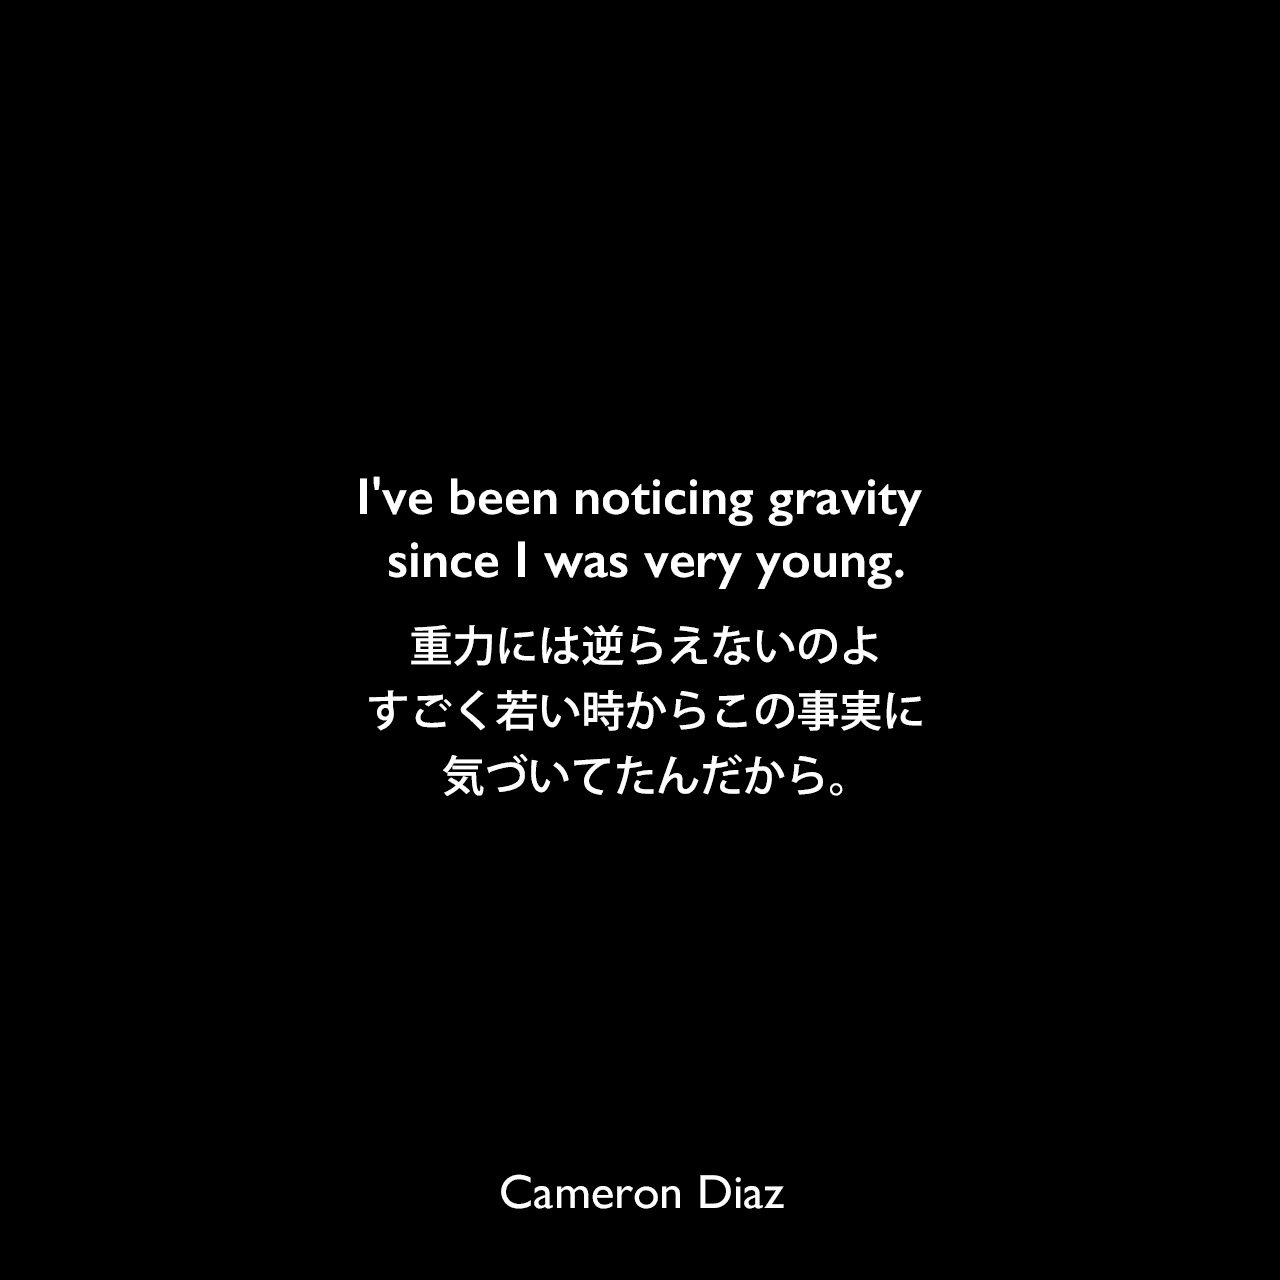 I've been noticing gravity since I was very young.重力には逆らえないのよ、すごく若い時からこの事実に気づいてたんだから。Cameron Diaz